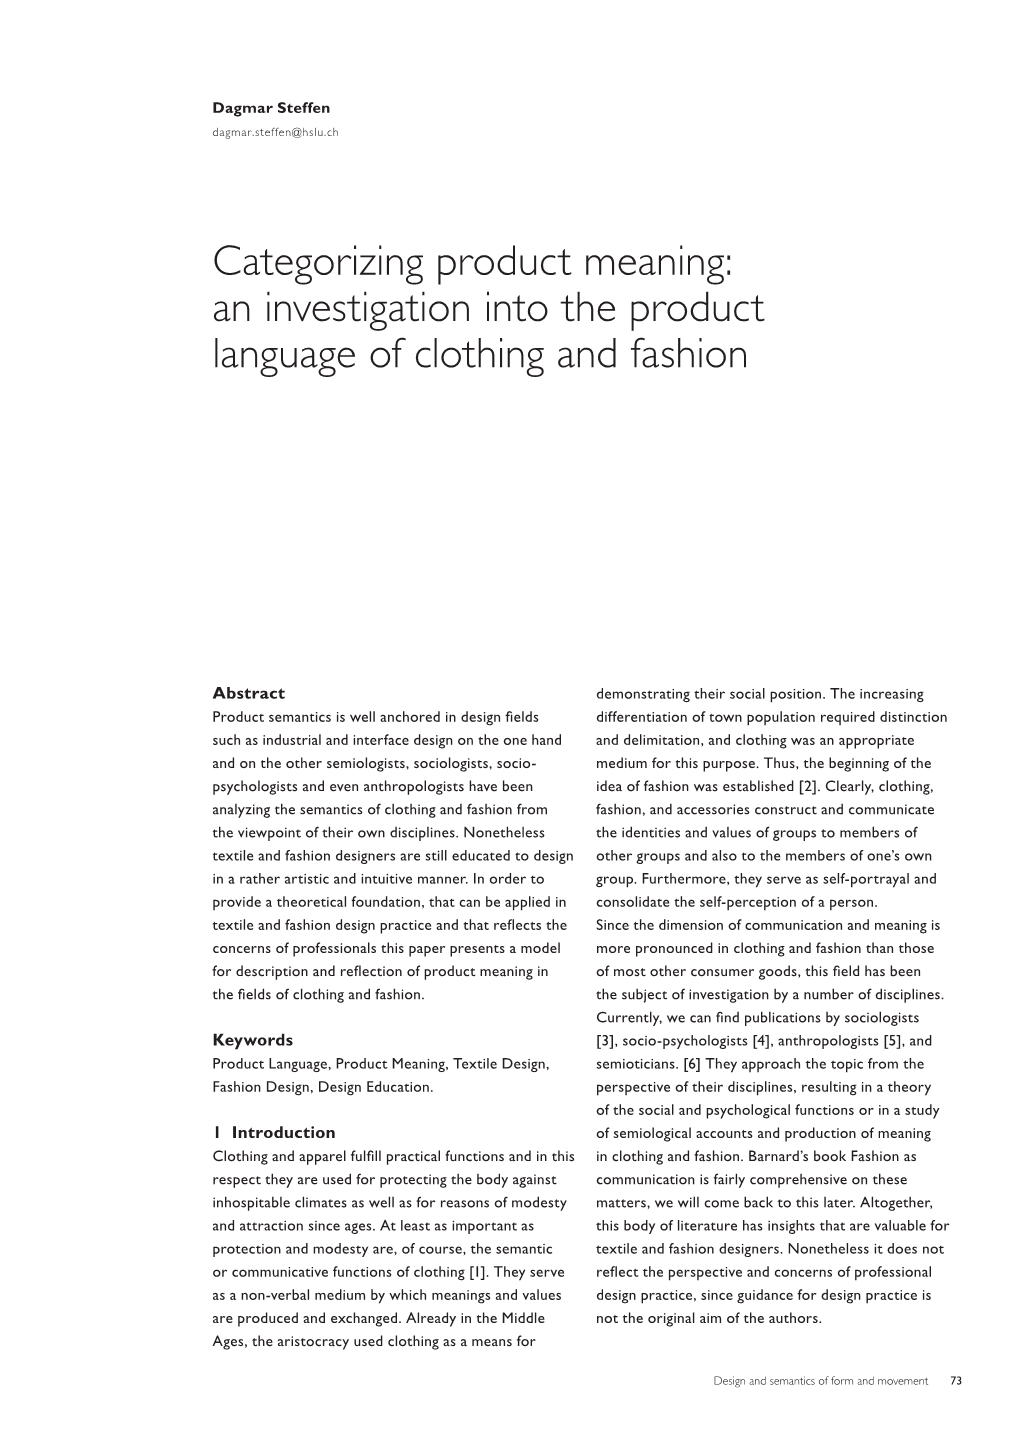 Categorizing Product Meaning: an Investigation Into the Product Language of Clothing and Fashion